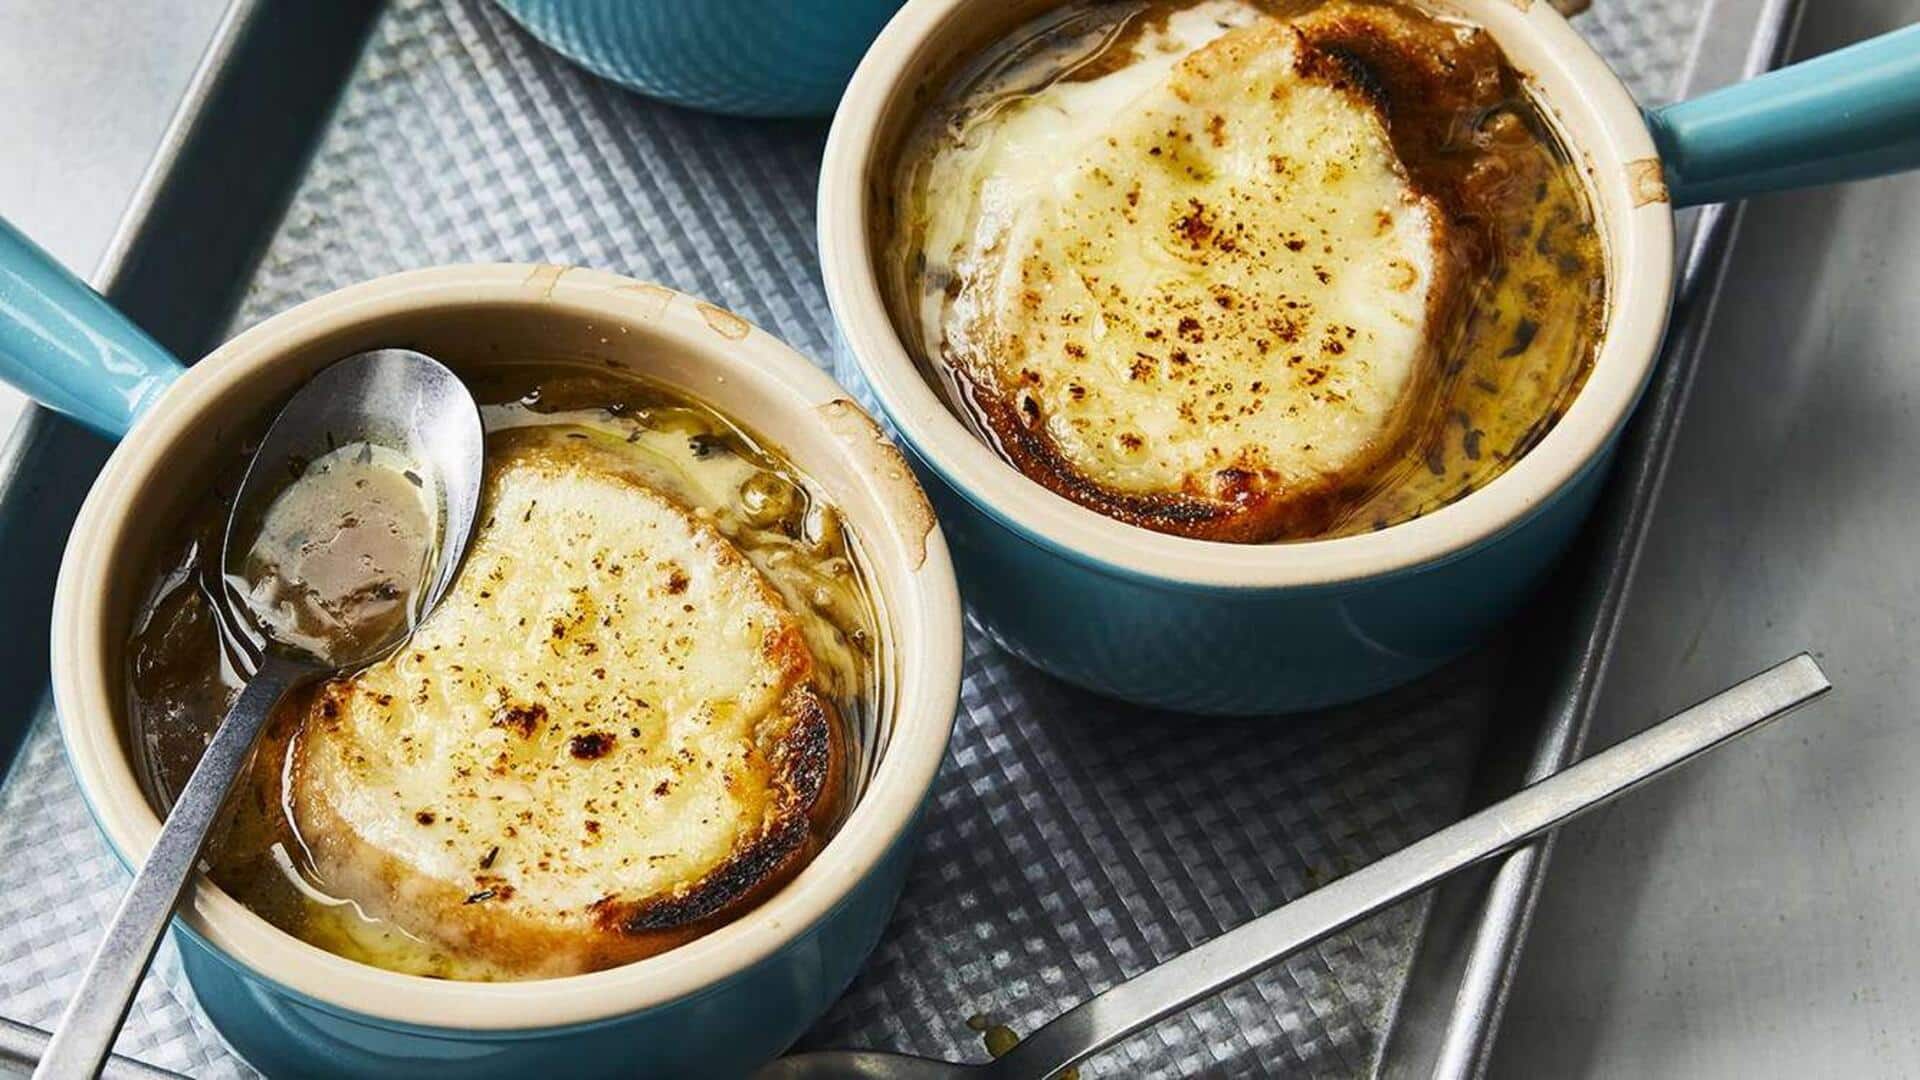 Prepare this flavorful French onion soup in 4 simple steps